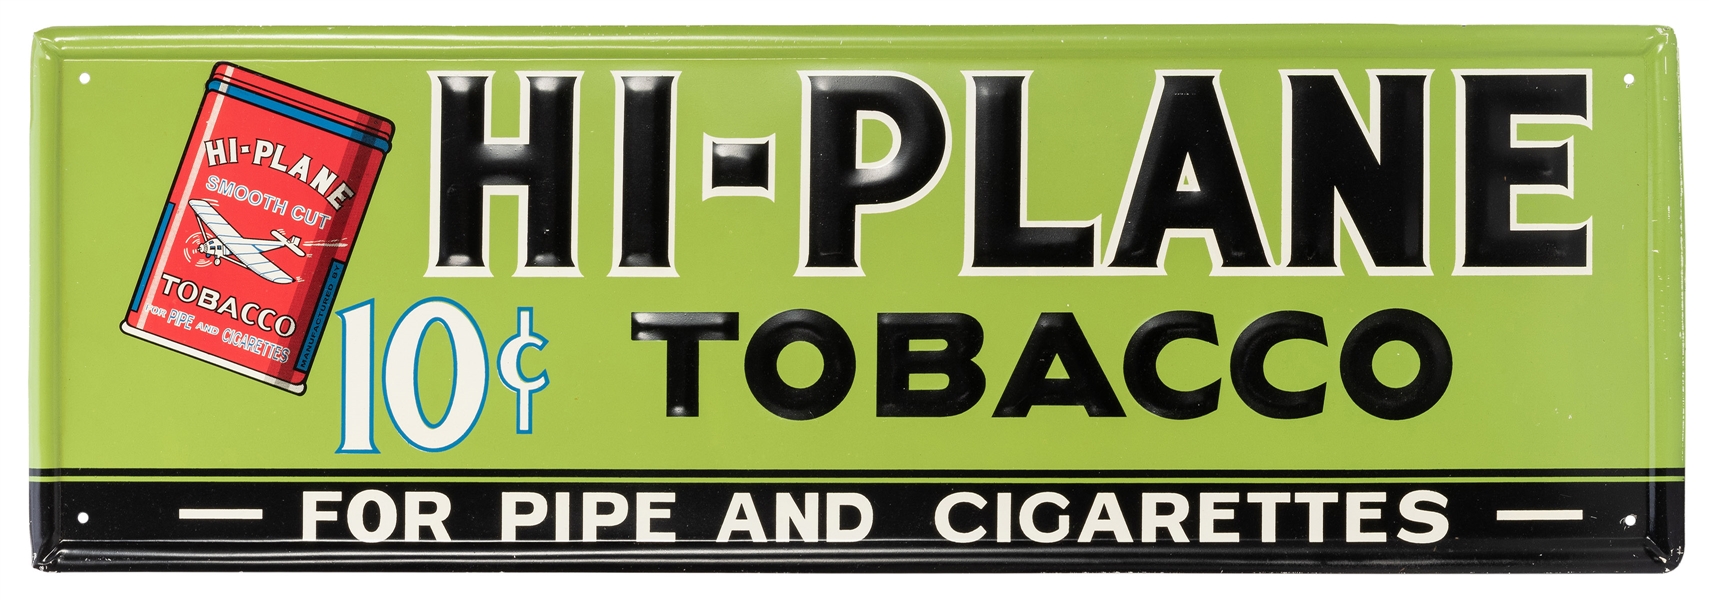  Hi-Plane Tobacco Tin Sign. Brightly colored sign with embos...